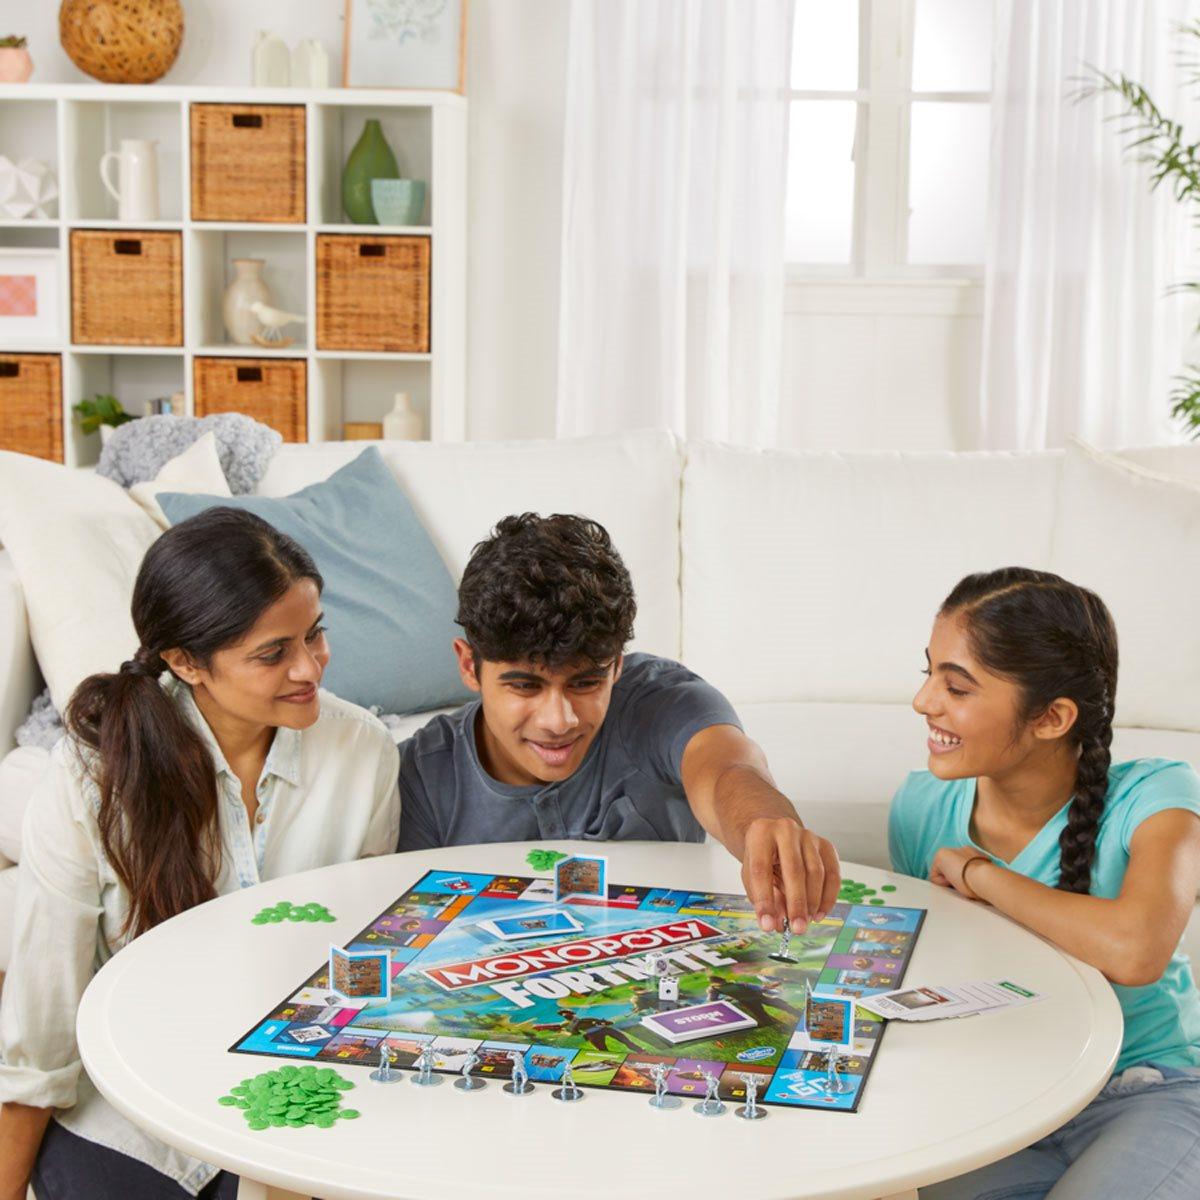 Fortnite Collectors Edition Monopoly Game - Emmett's ToyStop